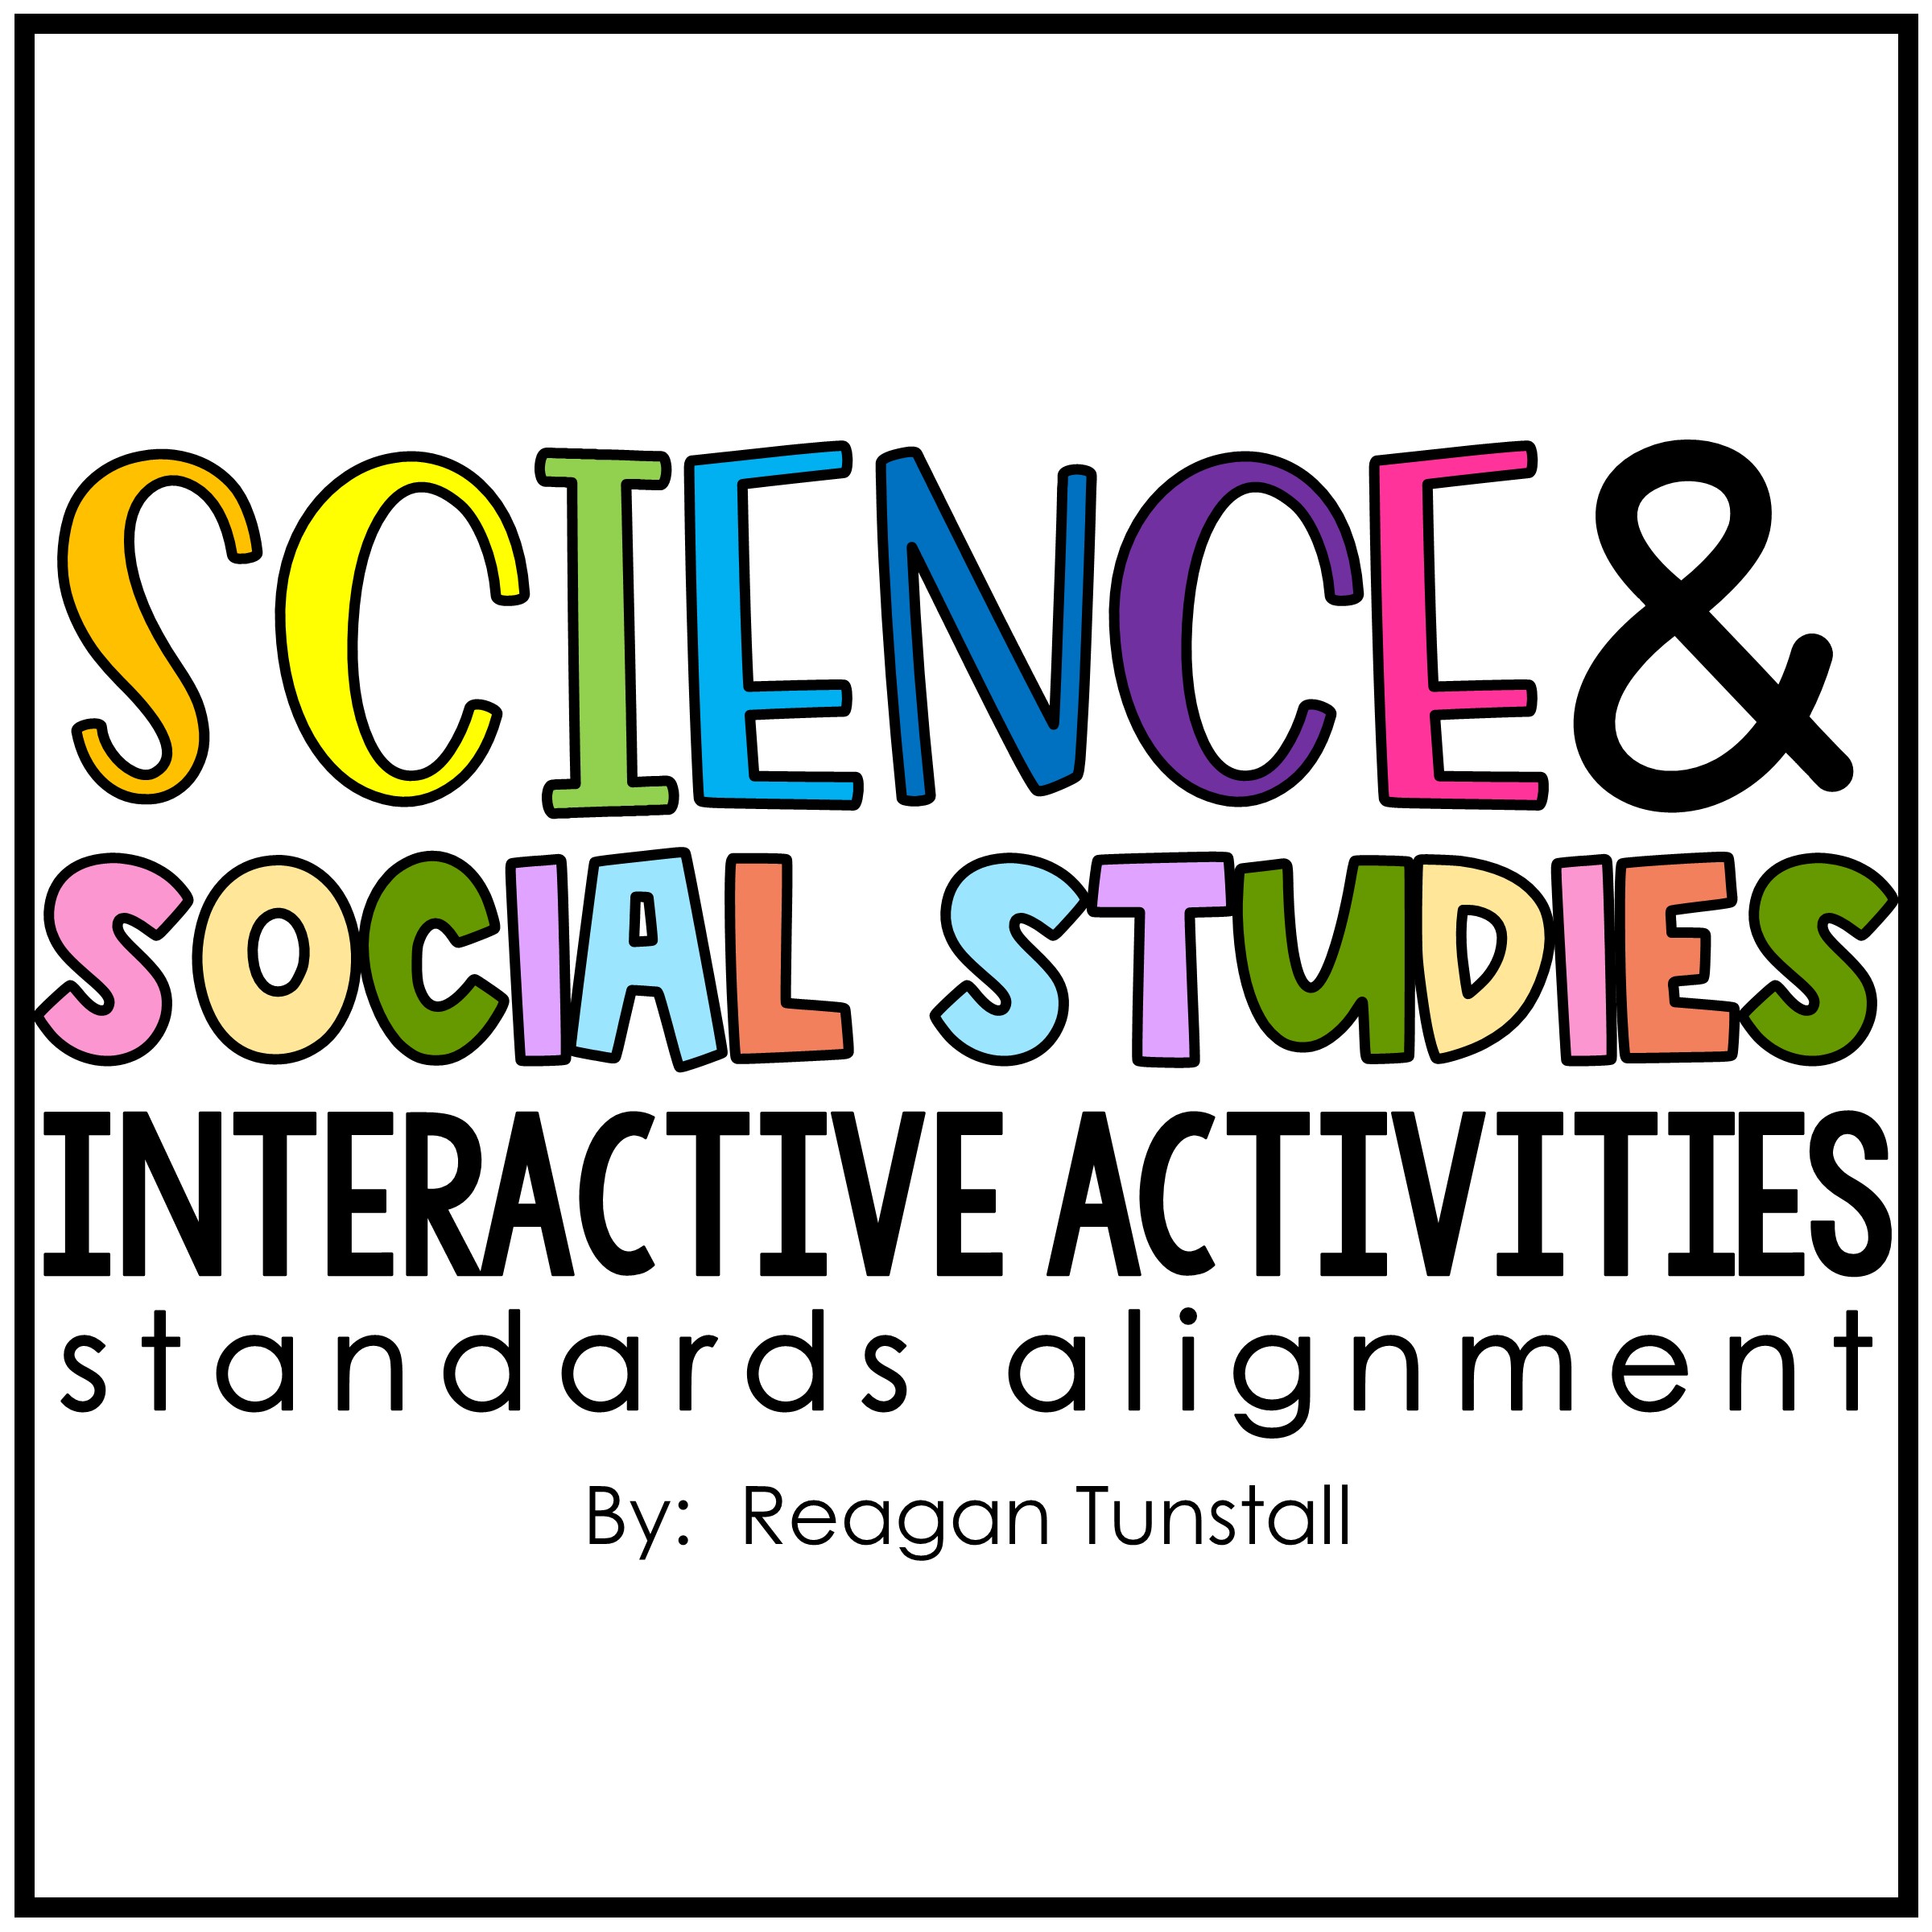 Science and social studies themes with standards alignment. Interactive activities to teach science and social studies standards for kindergarten, first grade, and second grade. 